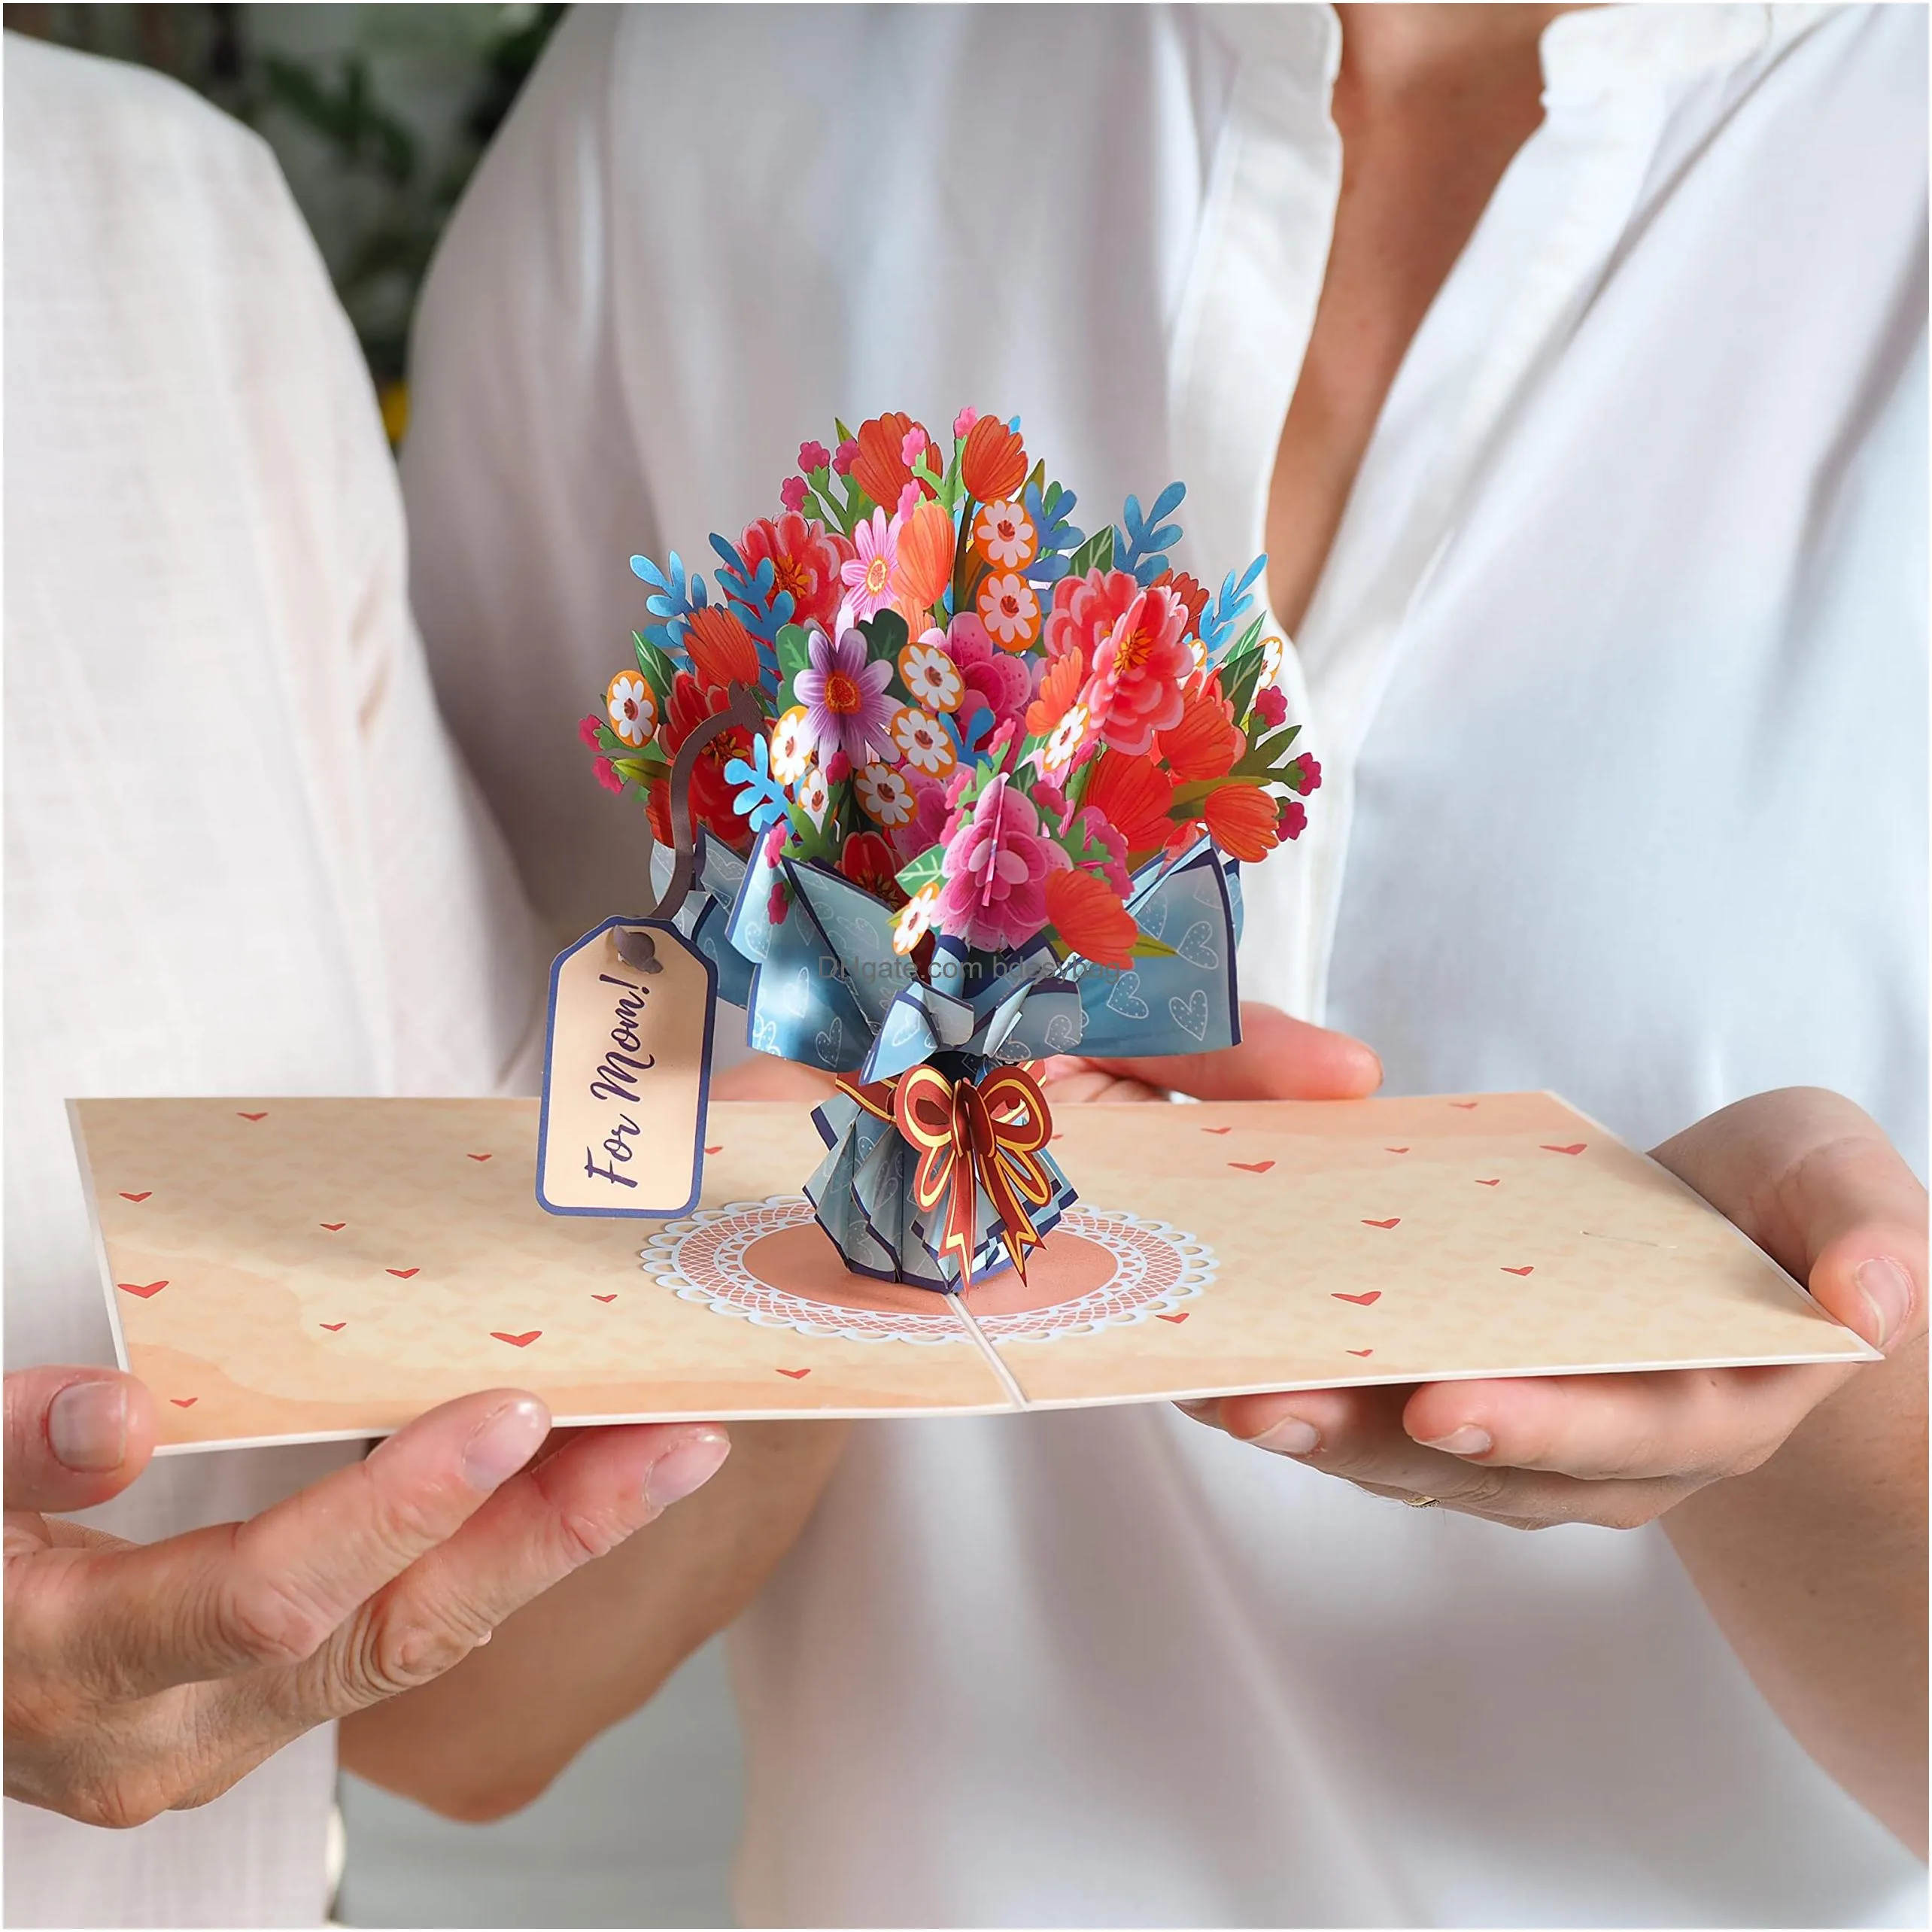 3d  up mothers day card mom flower bouquet for mother wife anyone 5 x 7 cover includes envelope and note tag